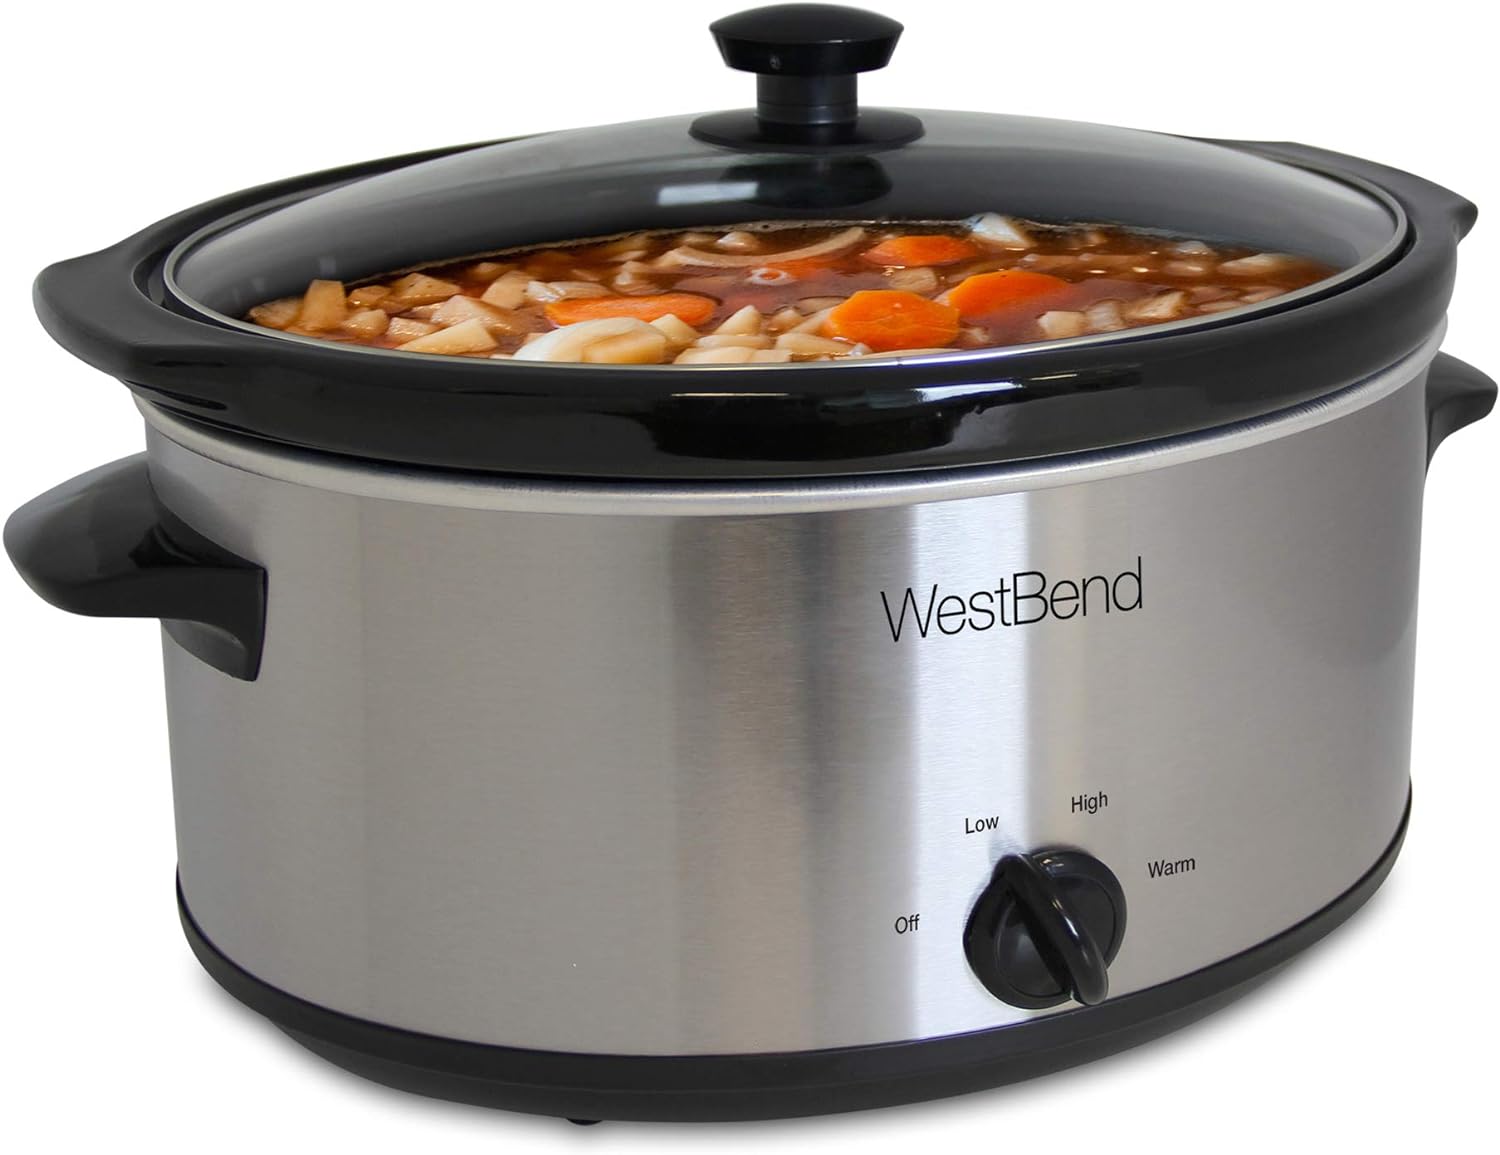 West Bend 87156 Oval Manual Slow Cooker with Ceramic Cooking Vessel and Glass Lid, 6-Quart, Silver (90  Days Warranty)